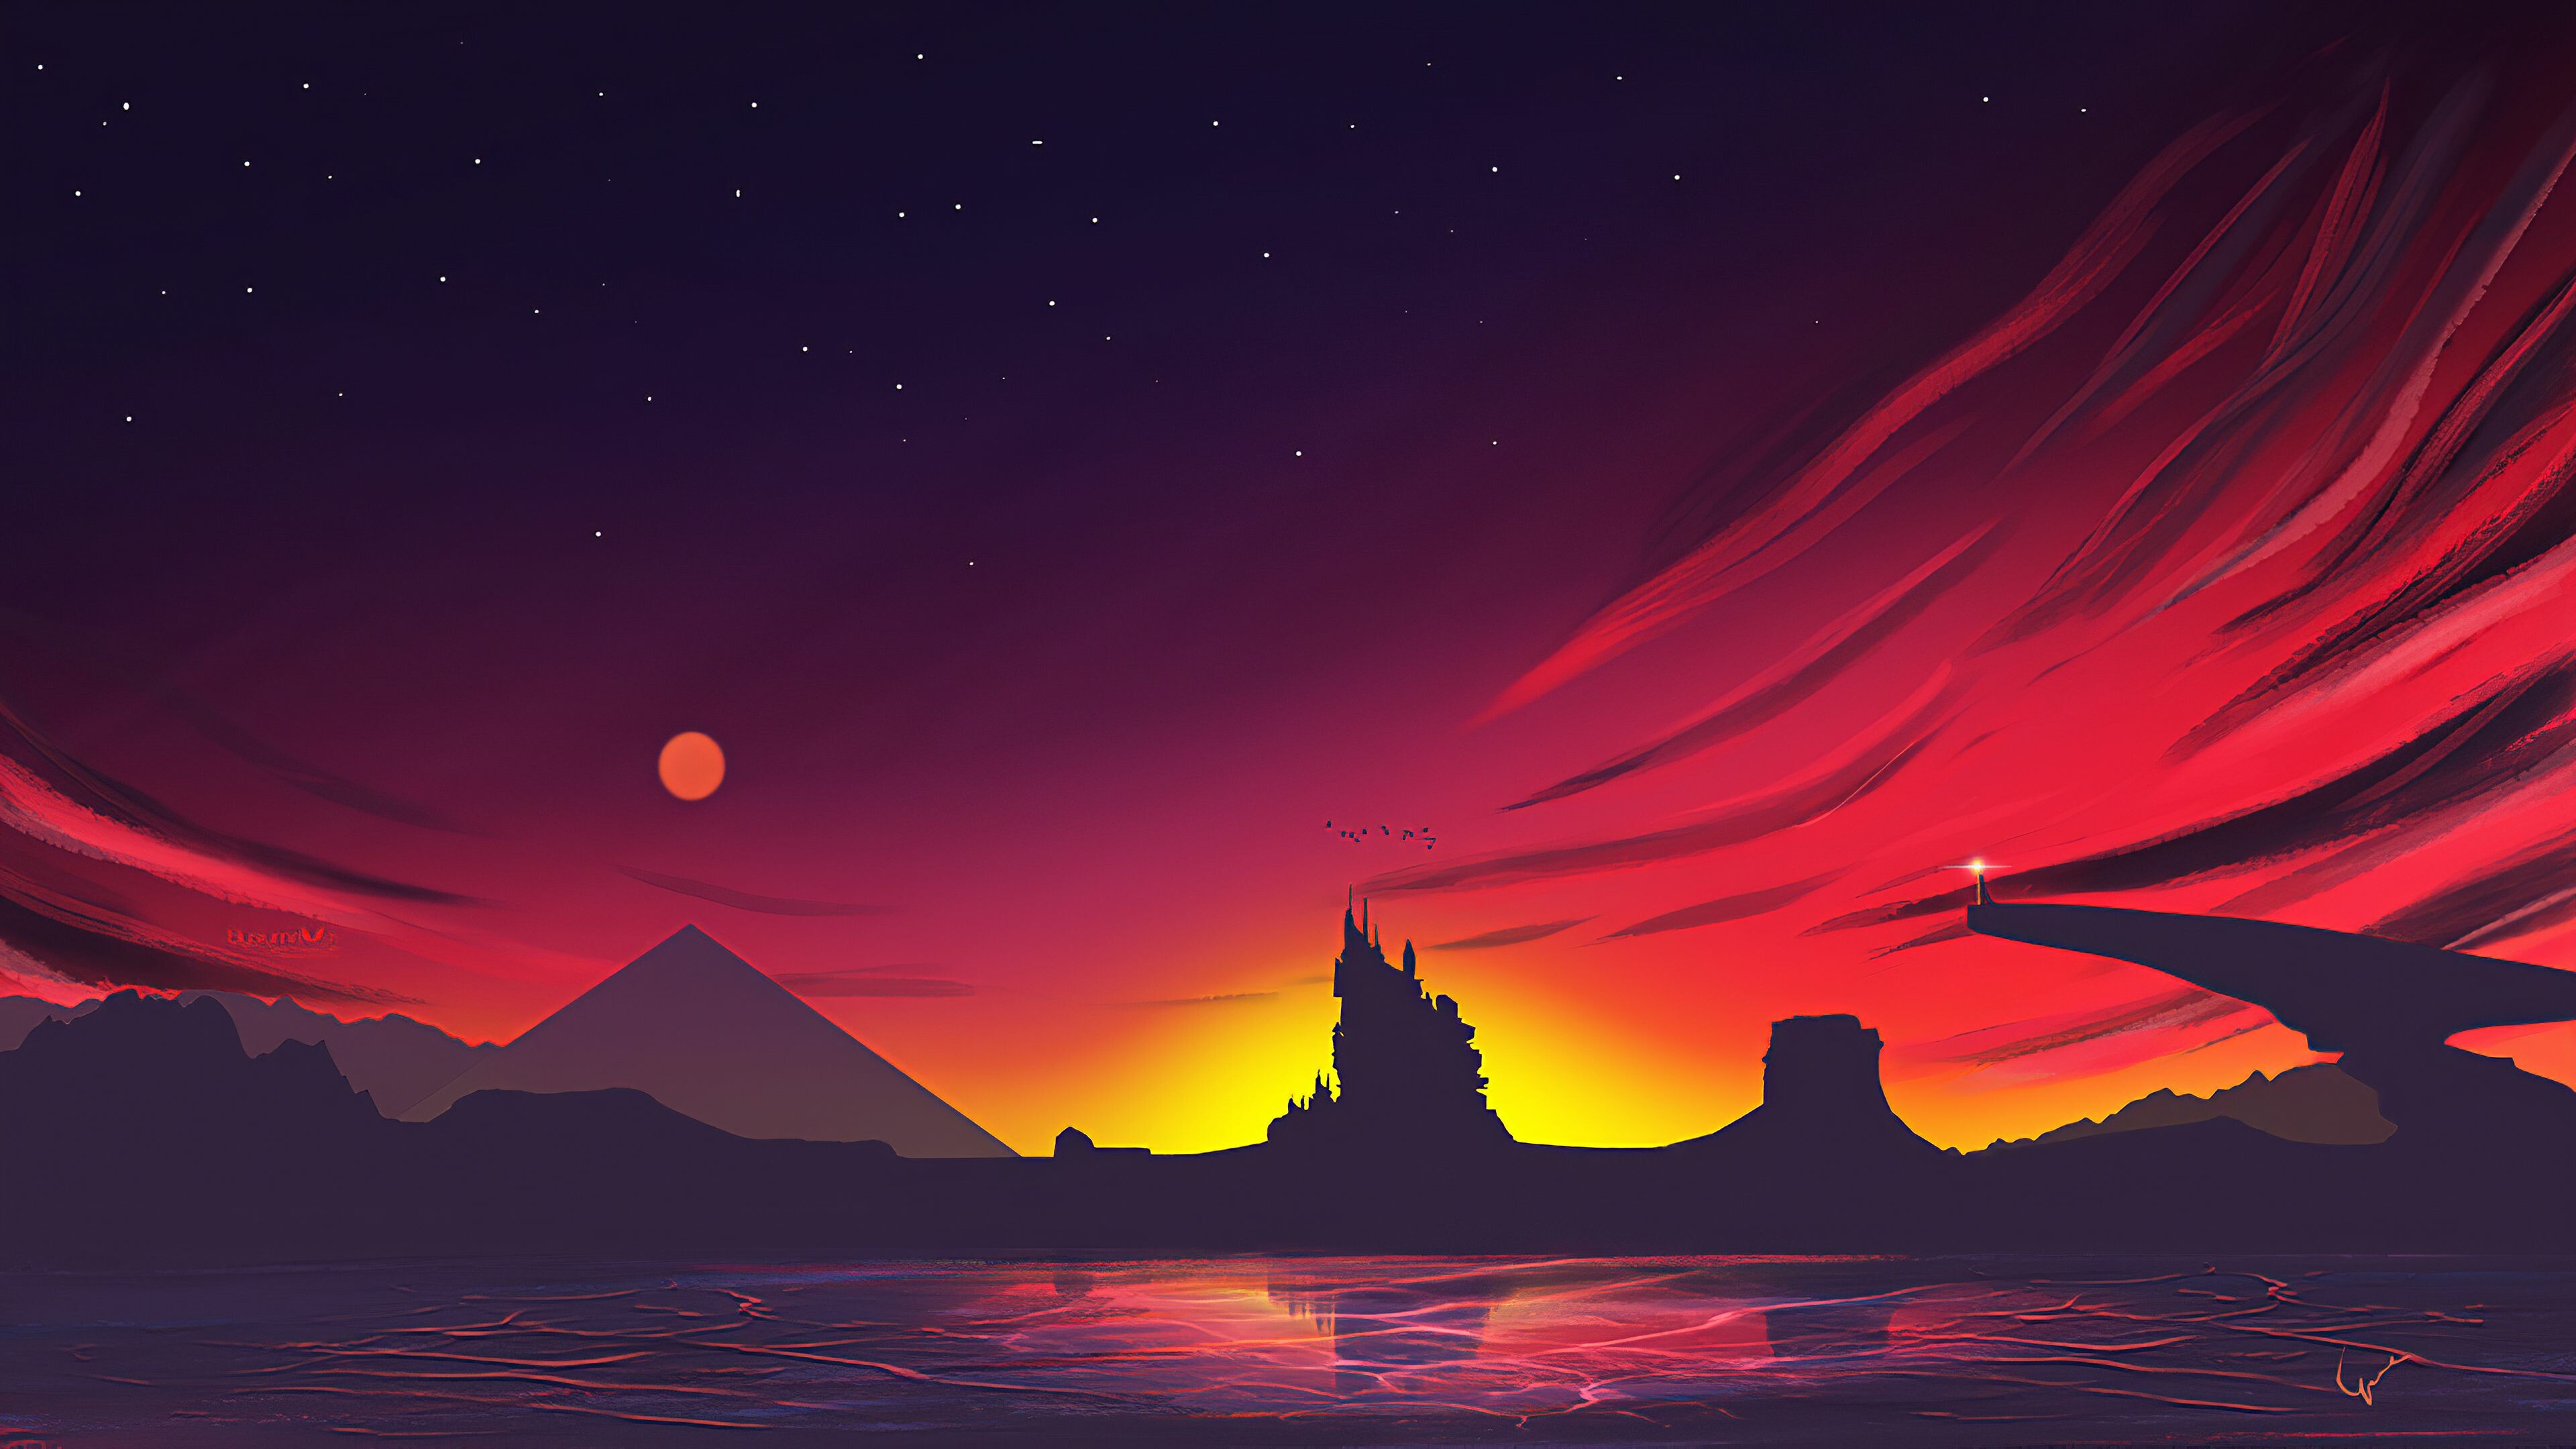 Sunset: Dusk, The very end of astronomical twilight. 3840x2160 4K Wallpaper.